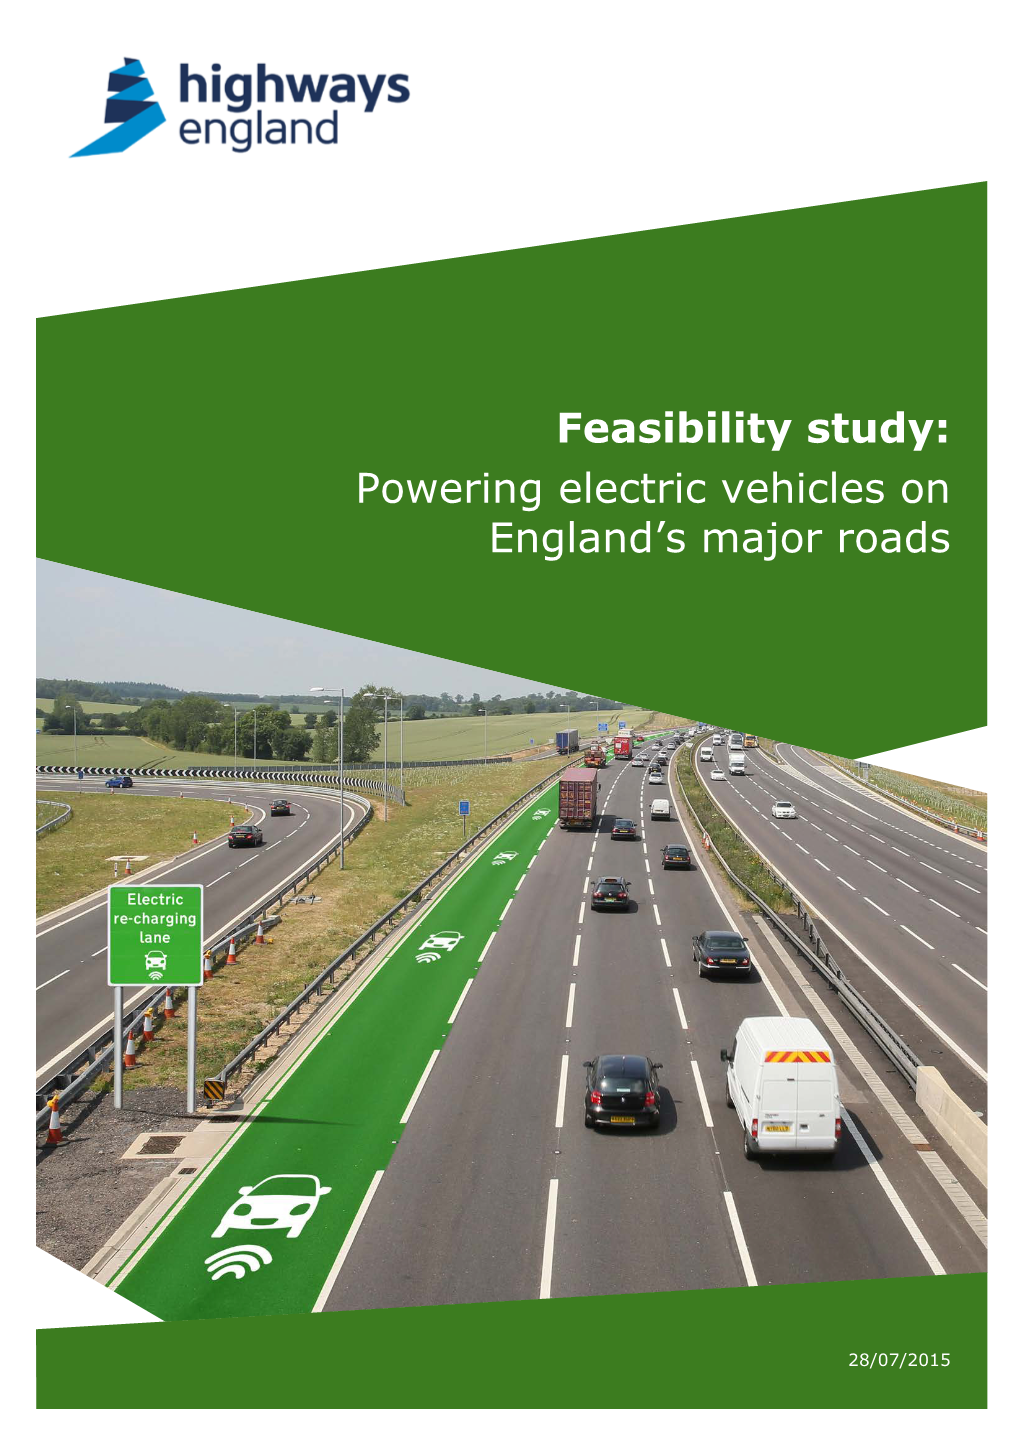 Feasibility Study: Powering Electric Vehicles on England's Major Roads